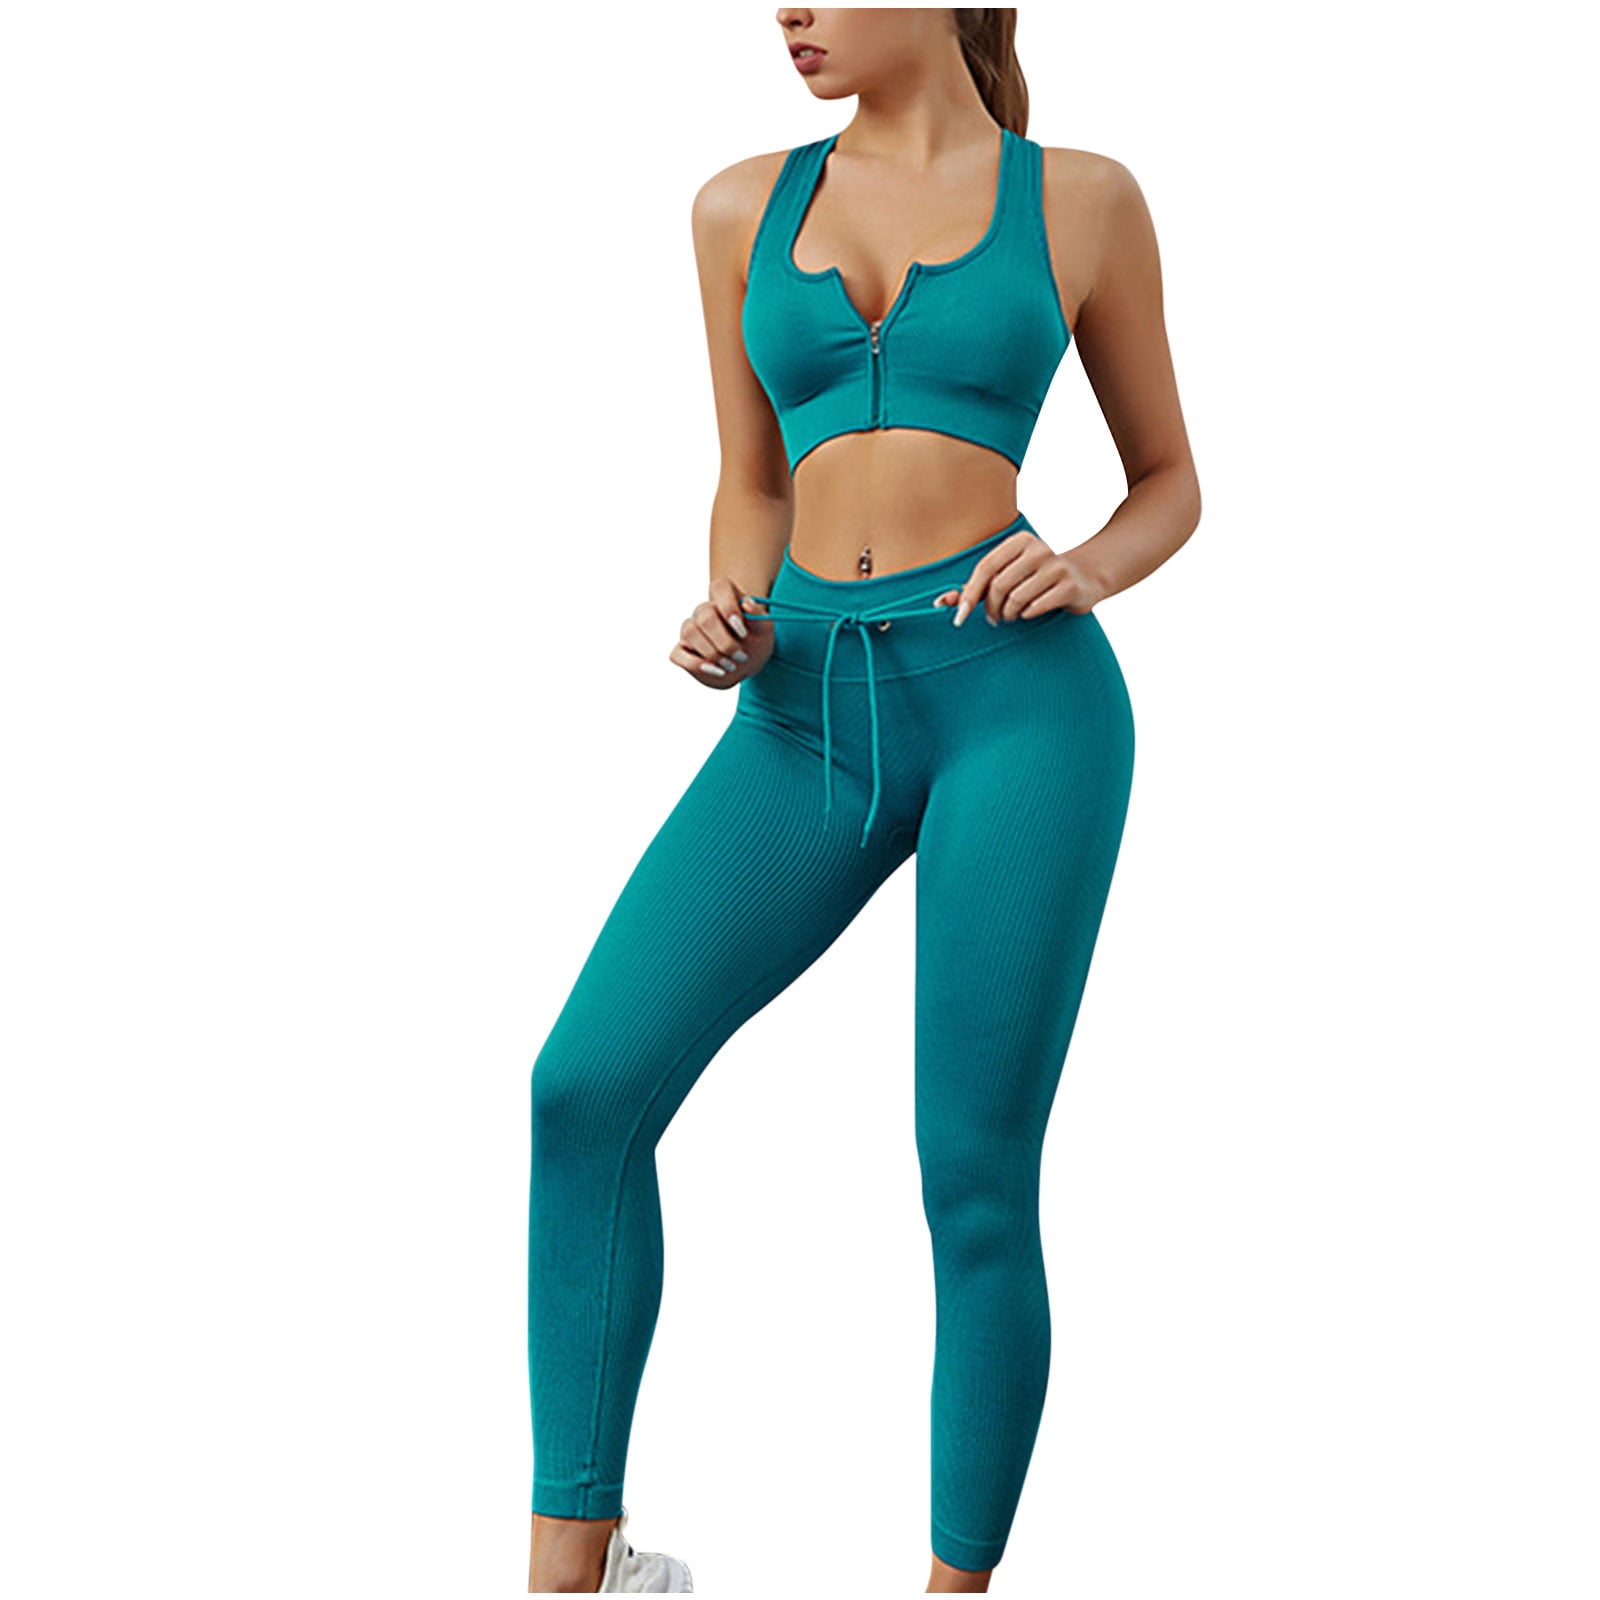 Women's Activewear Set Workout Sets 2 In 1 2 Piece Color Block Sports Bra  Leggings Pink Blue Spandex Yoga Fitness Gym Workout Tummy Control Butt Lift